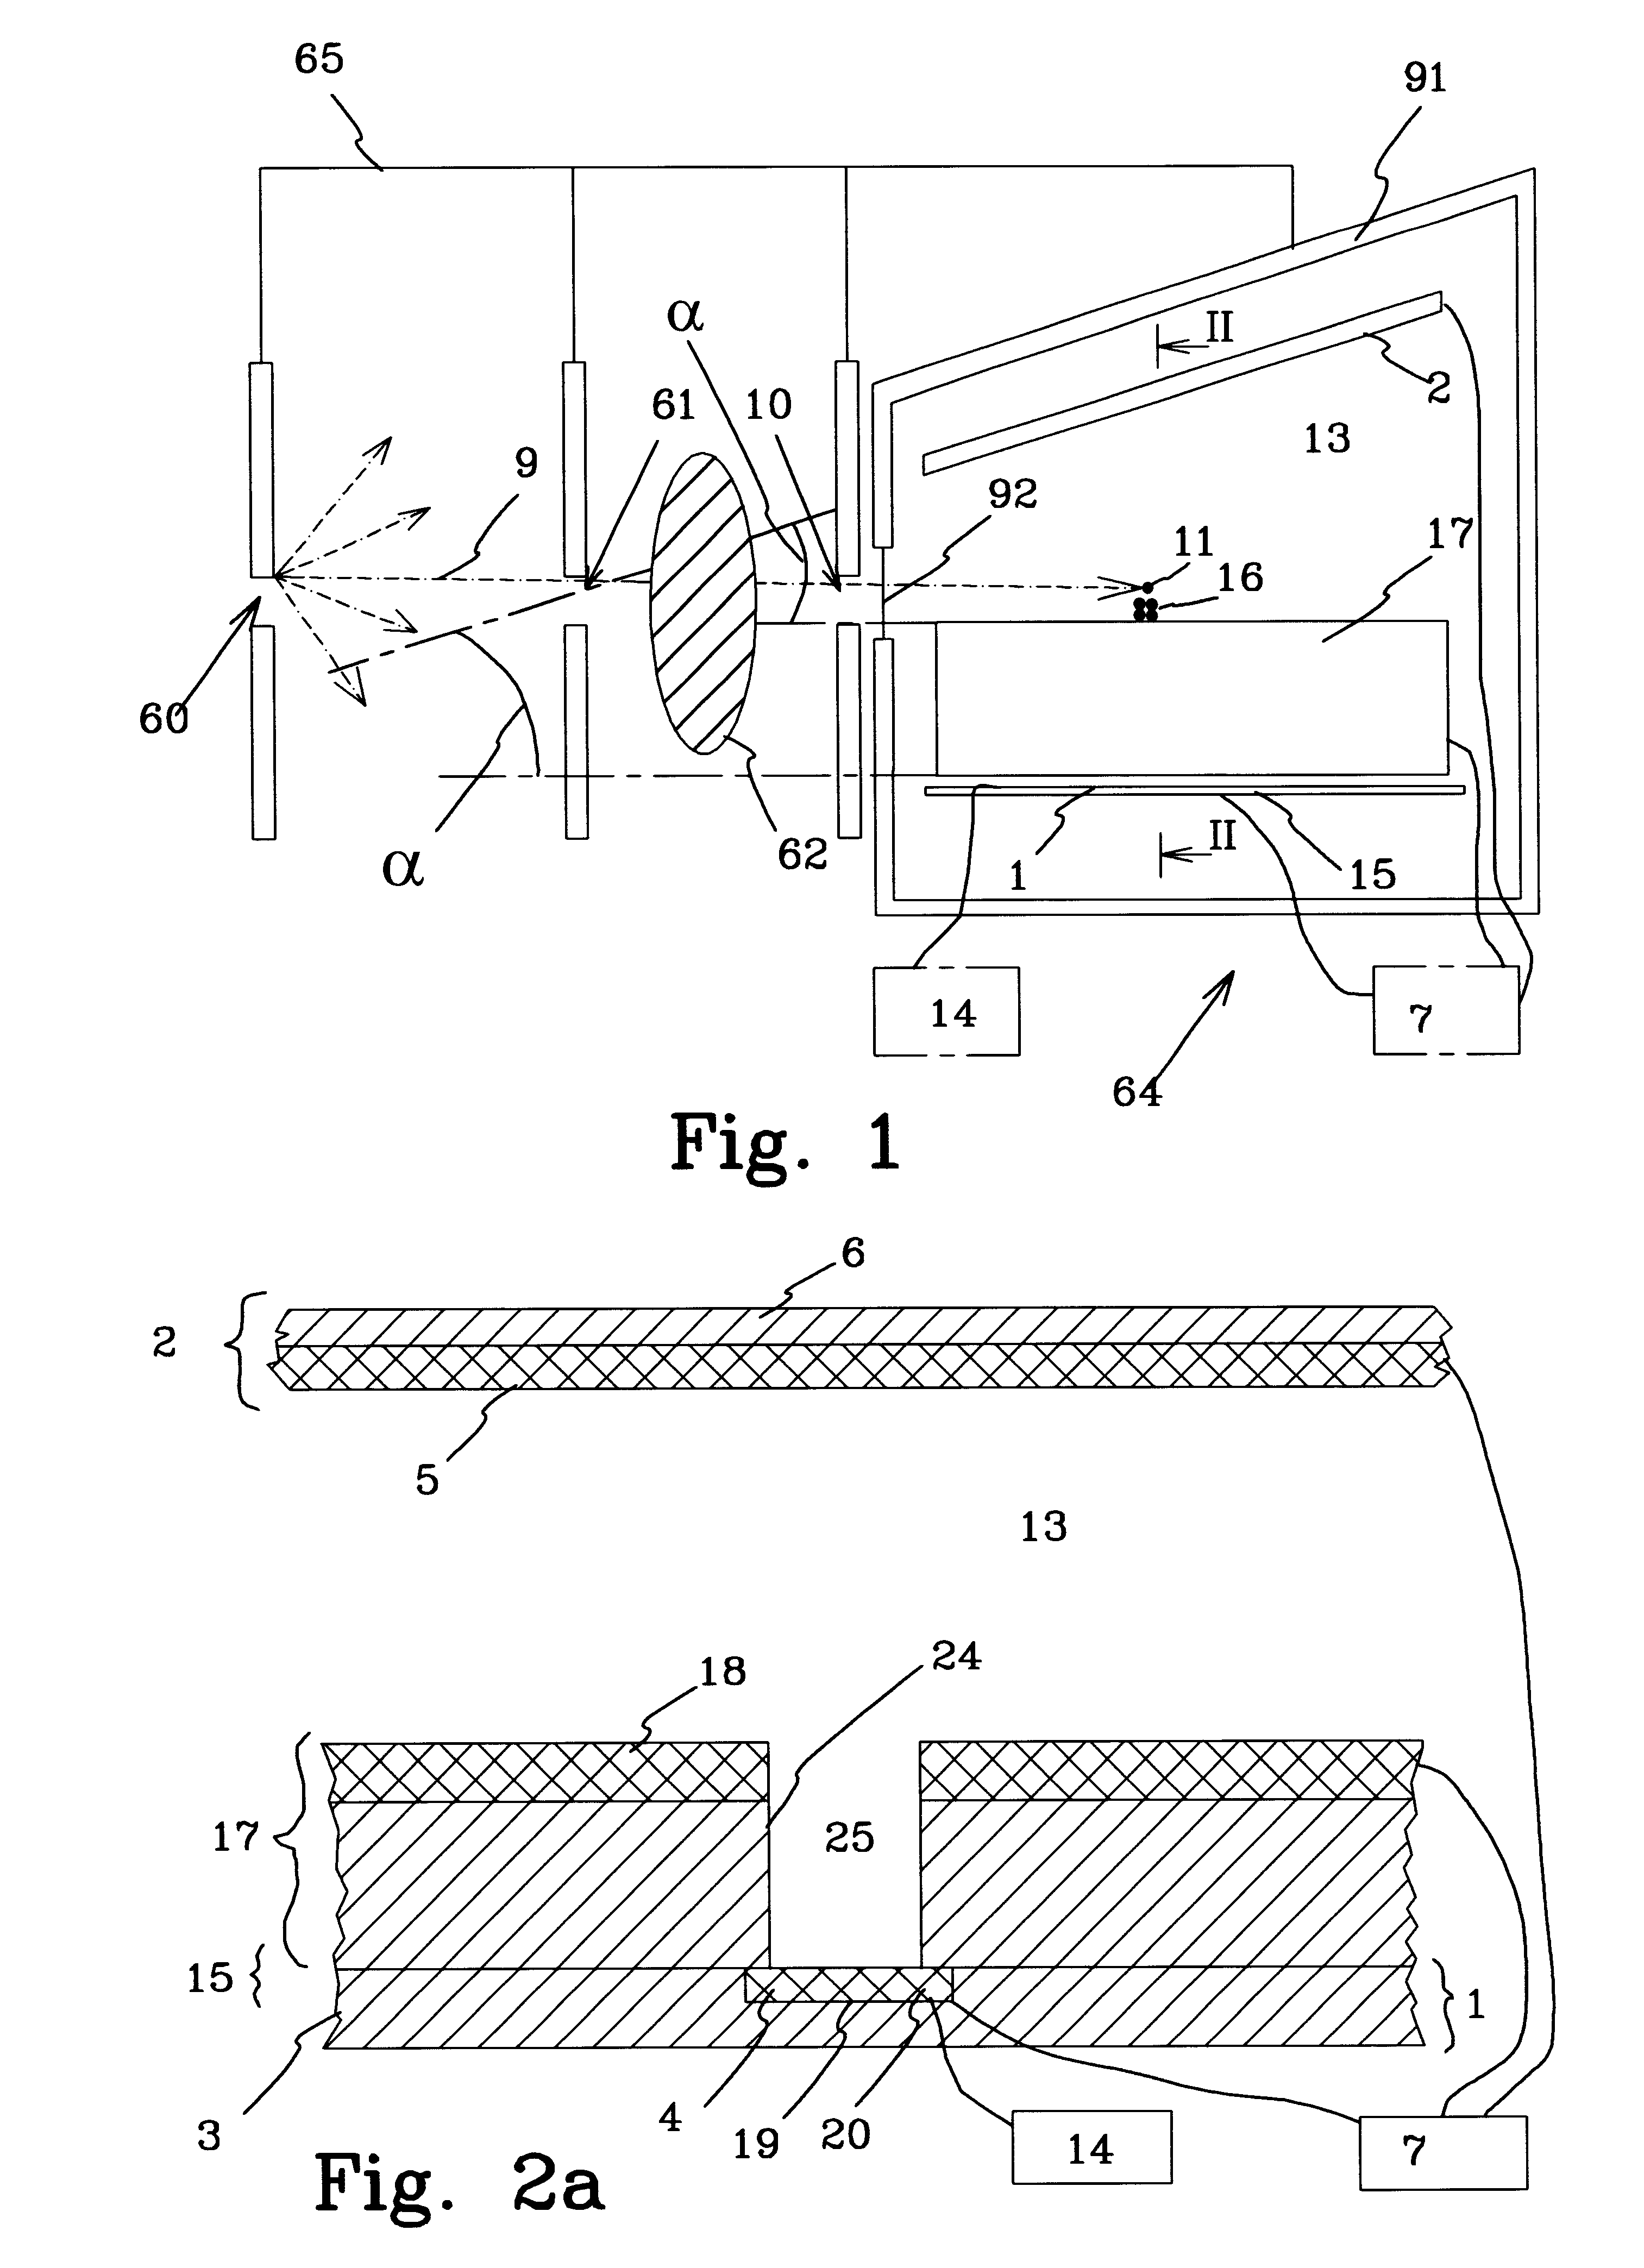 Radiation detector and an apparatus for use in planar beam radiography